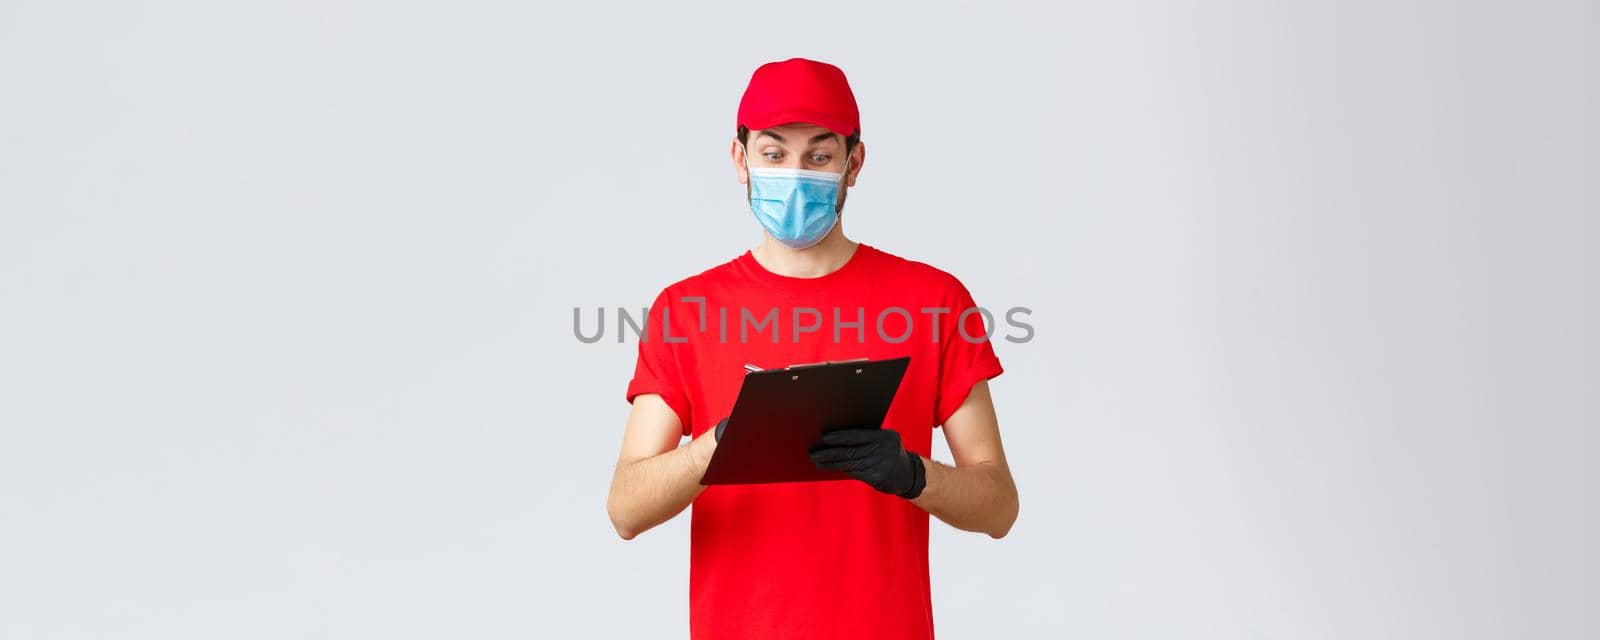 Packages and parcels delivery, covid-19 quarantine delivery, transfer orders. Enthusiastic courier in red uniform, face mask and gloves, writing down, checking order form on clipboard, deliver goods.